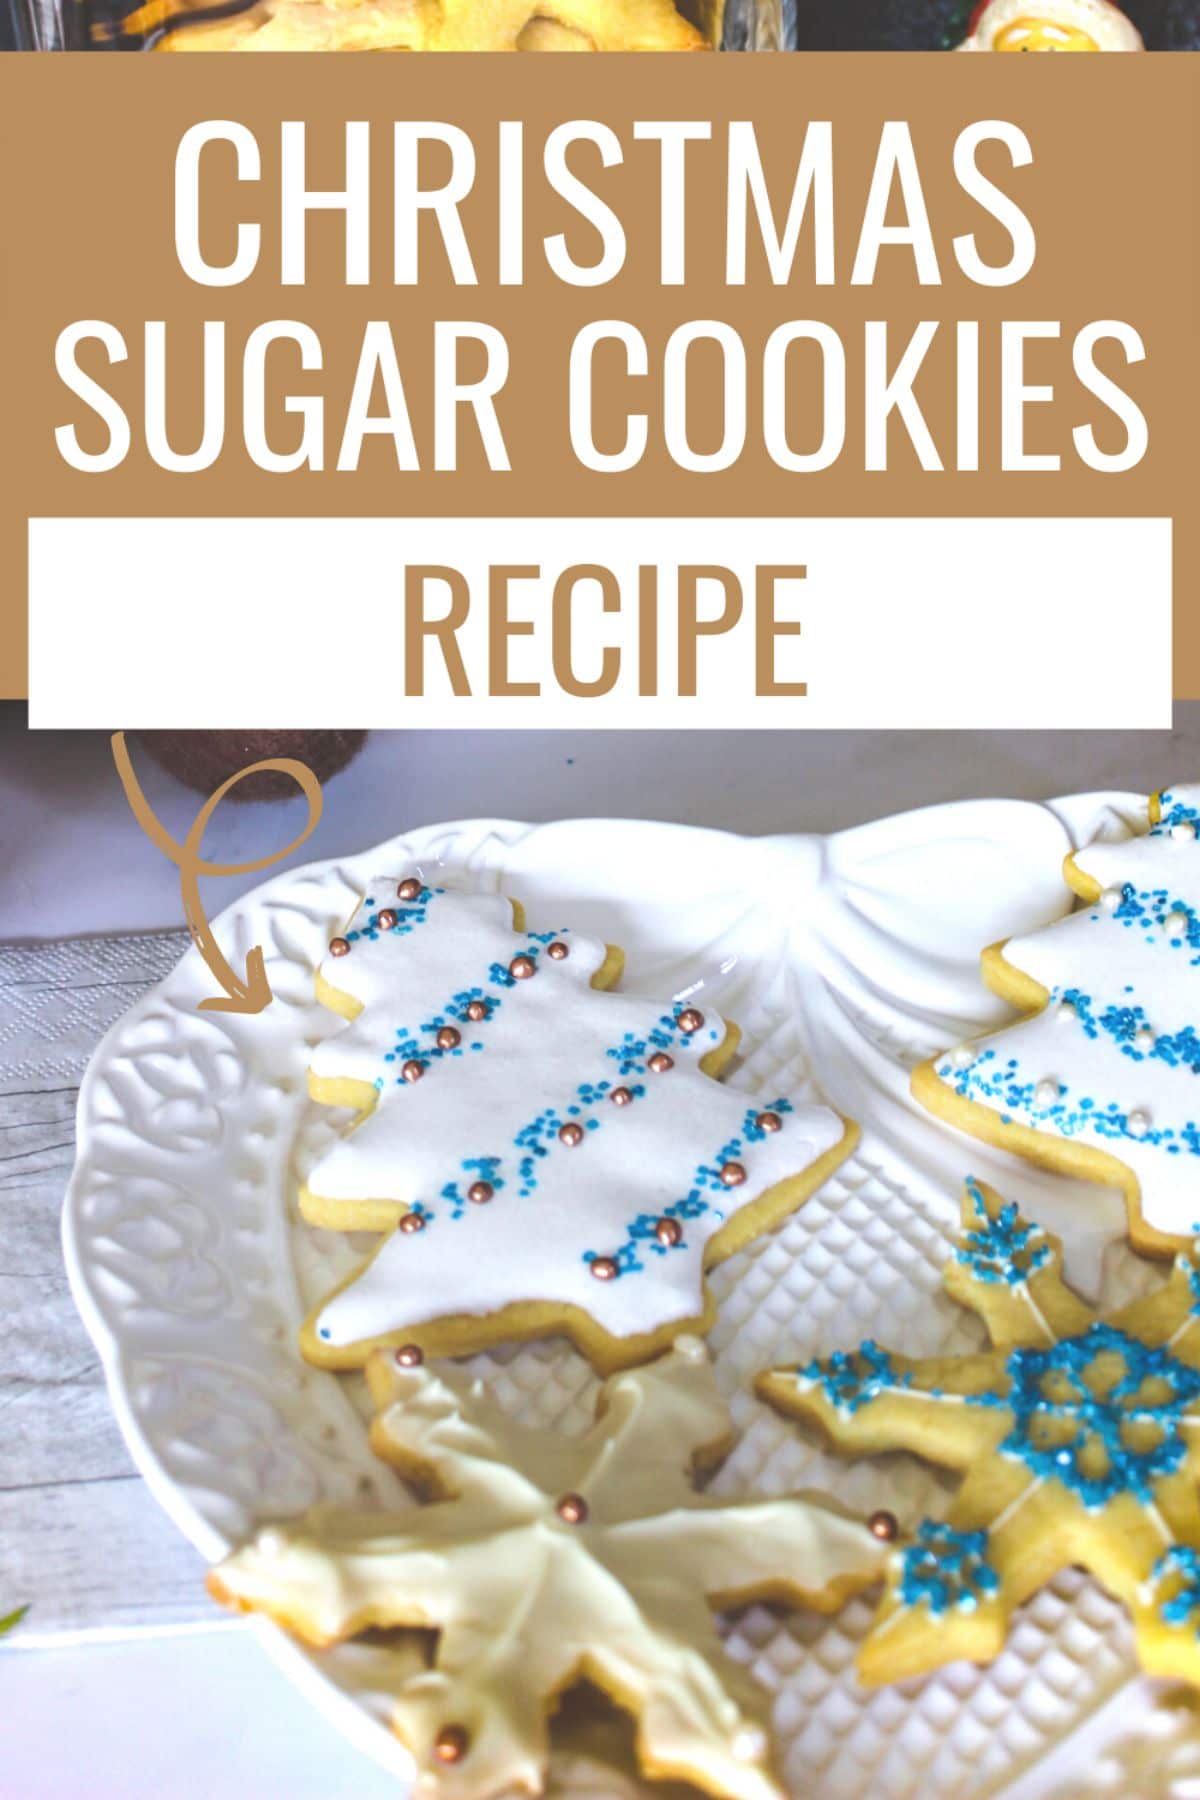 This Christmas Sugar Cookies recipe is my favorite roll-out sugar cookies recipe. They're crispy on the outside and chewy in the center. #christmascookie #christmas #cookie #sugarcookie #recipe via @wondermomwannab